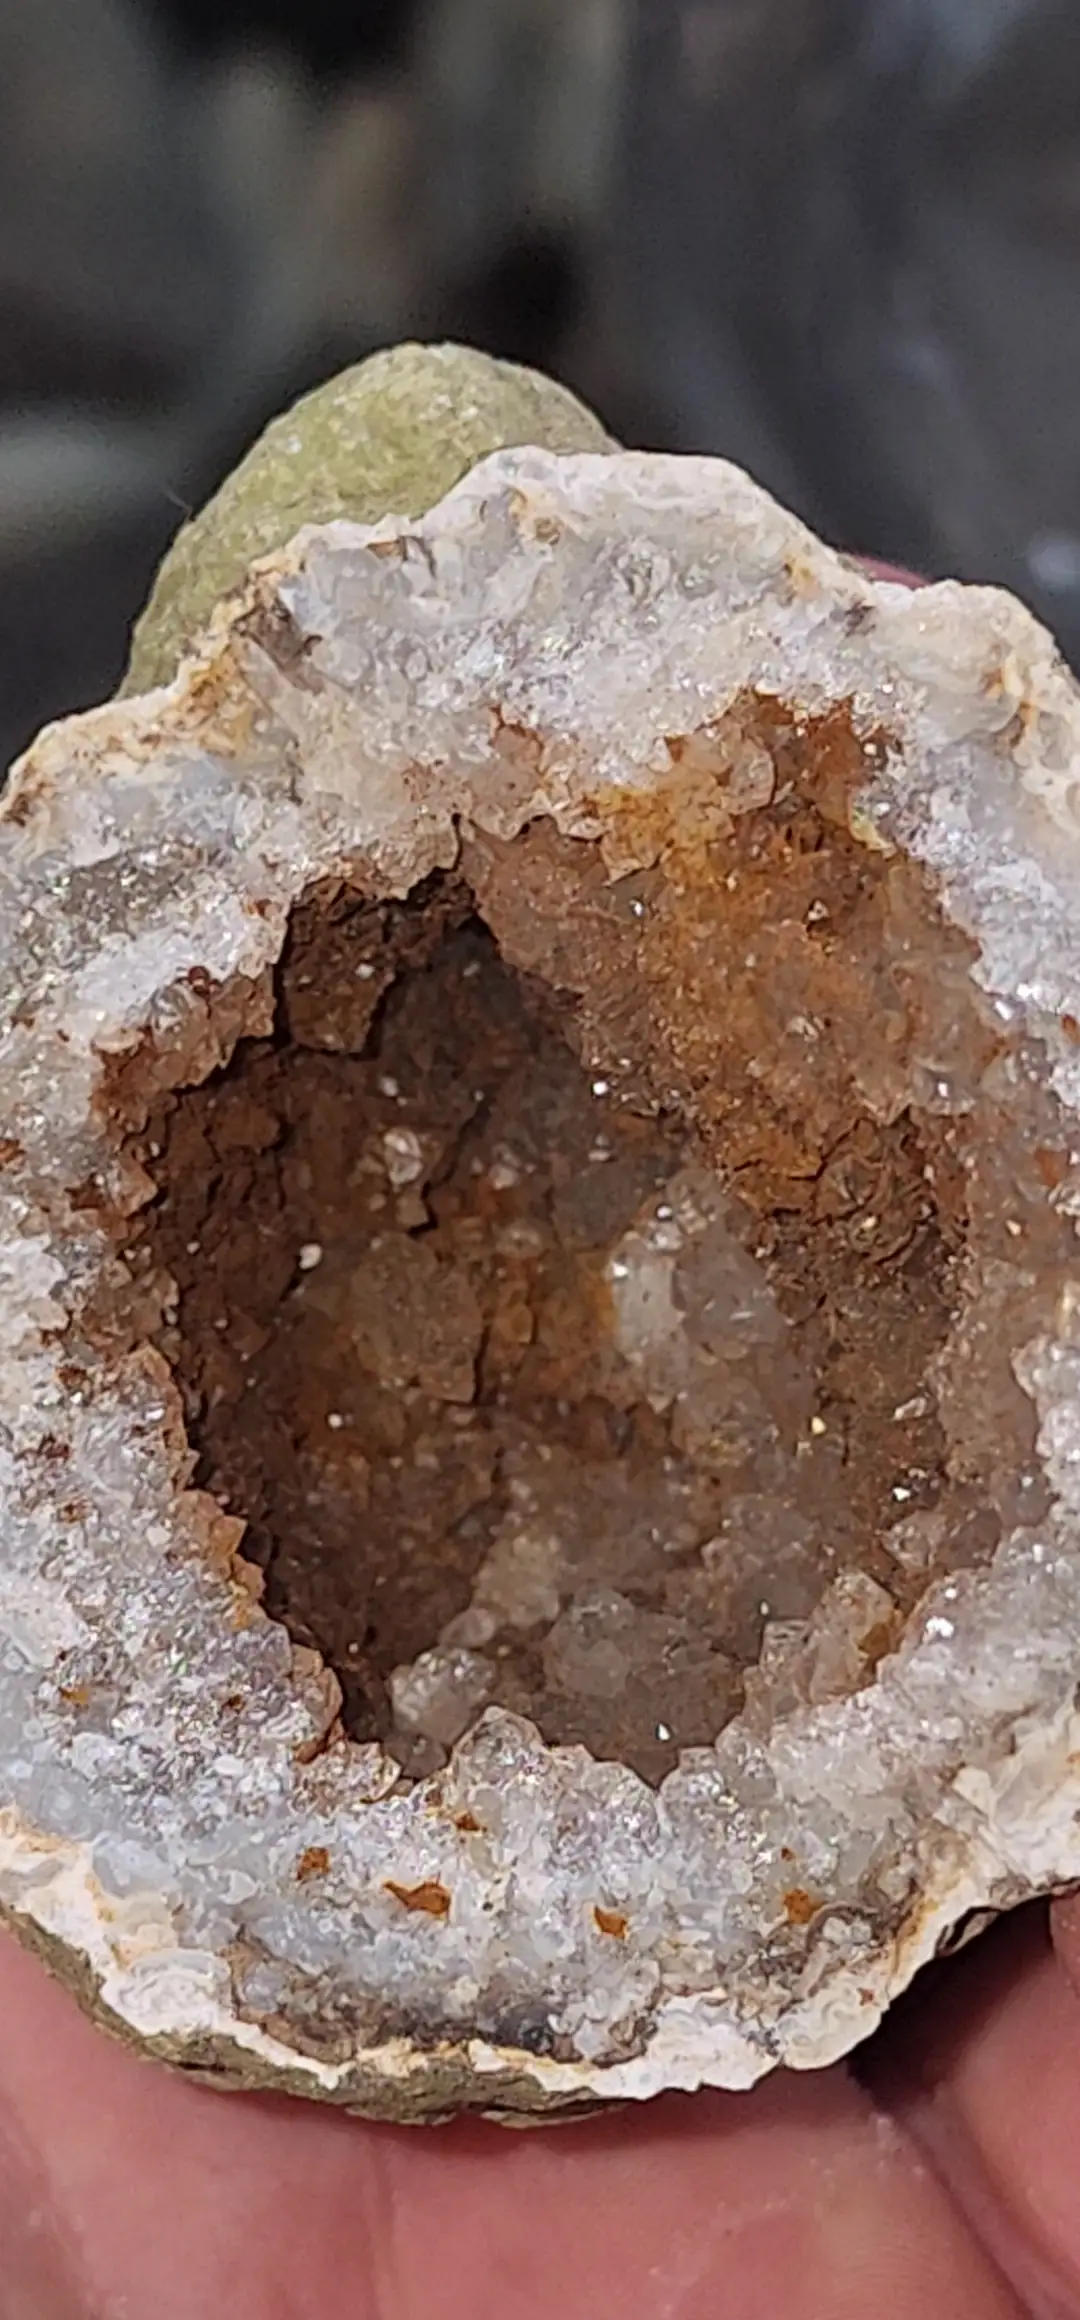 Breaking Open a Keokuk Geode with Crystals Inside 